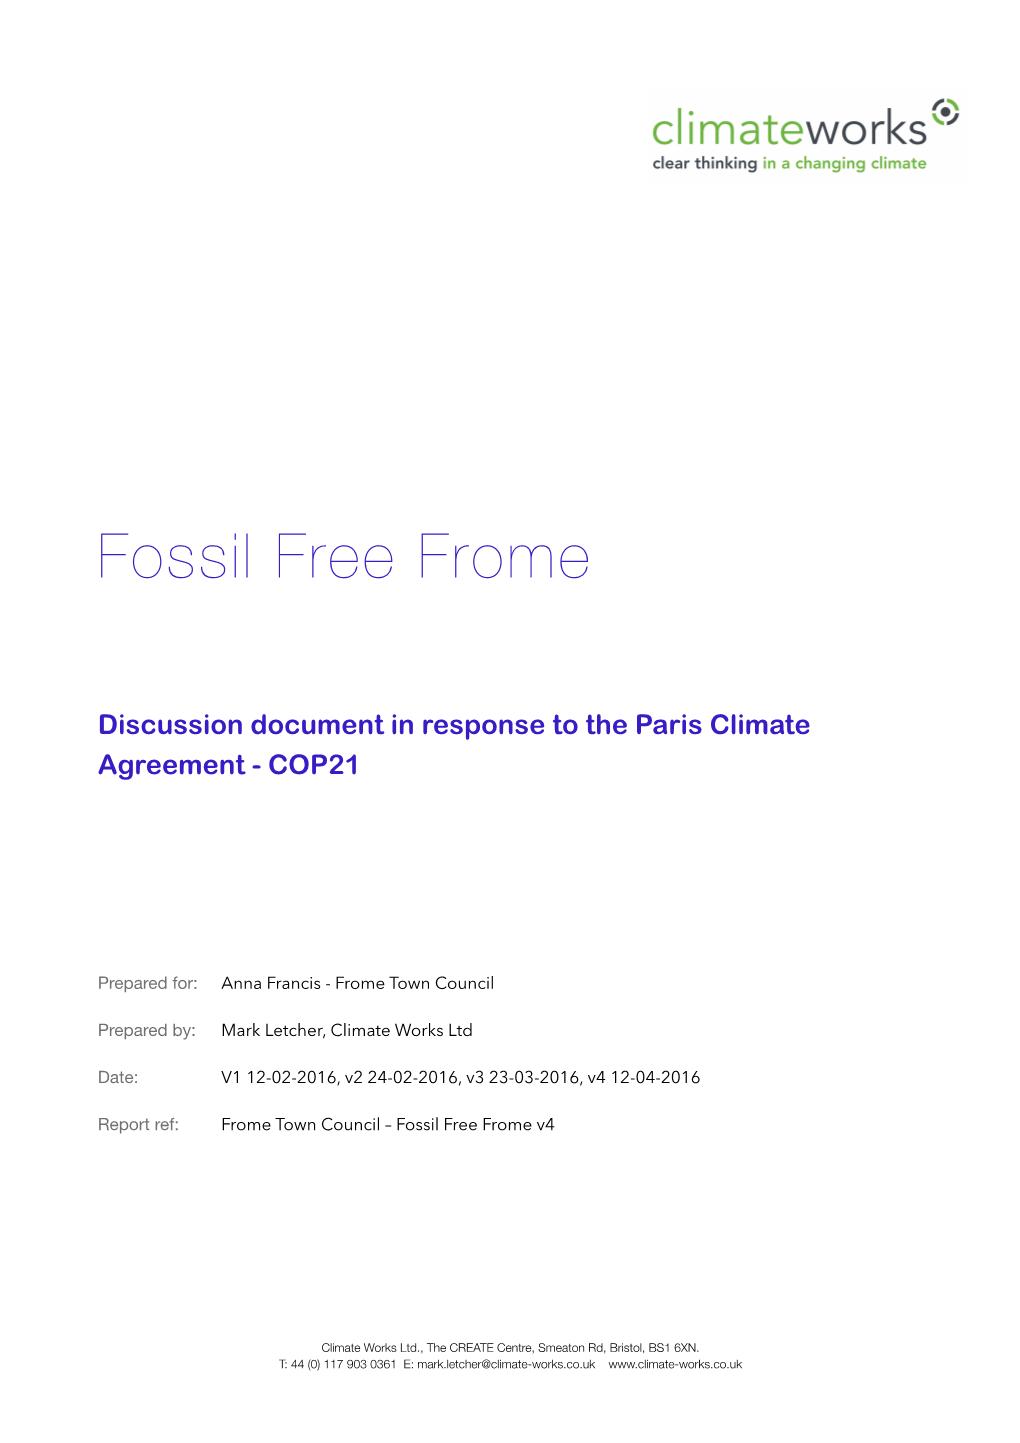 Fossil Free Frome